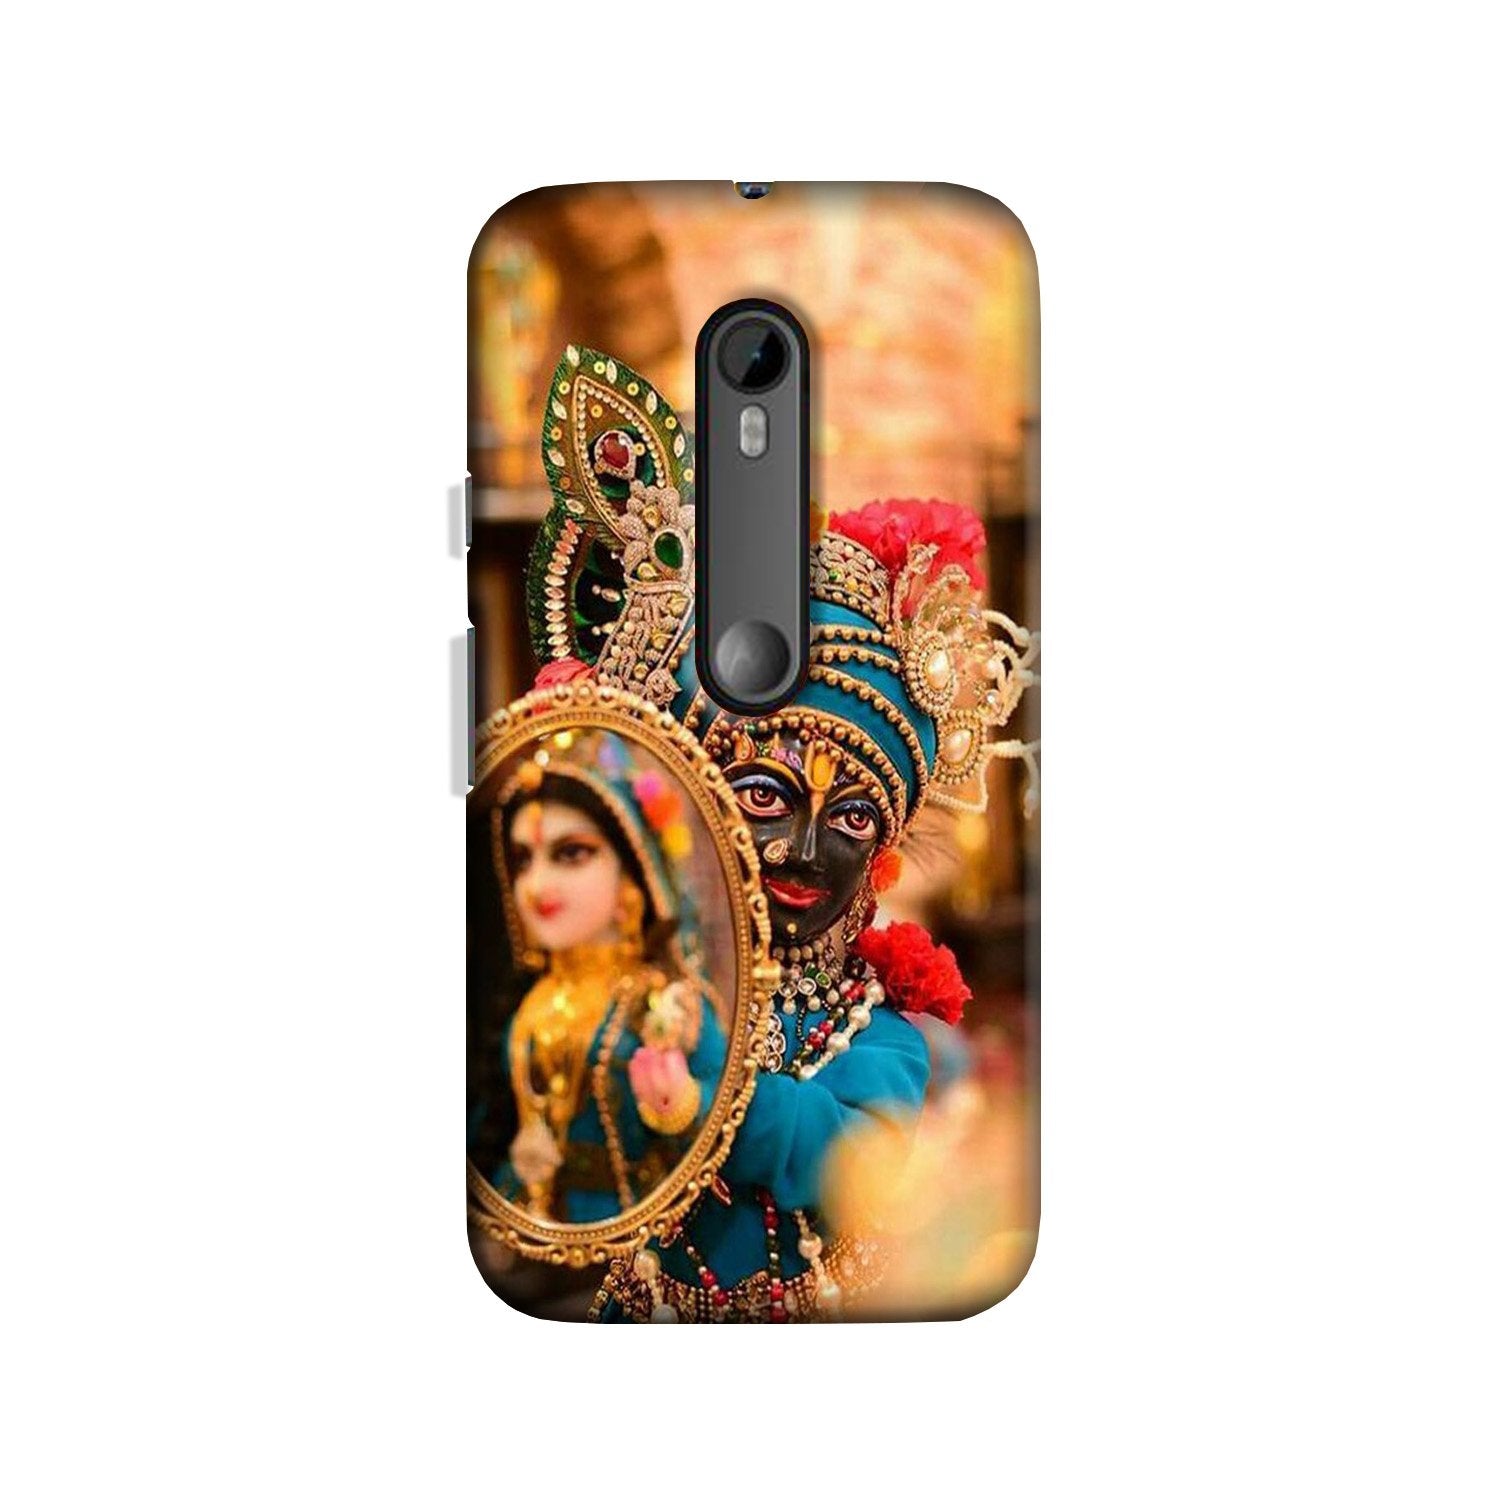 Lord Krishna5 Case for Moto X Style